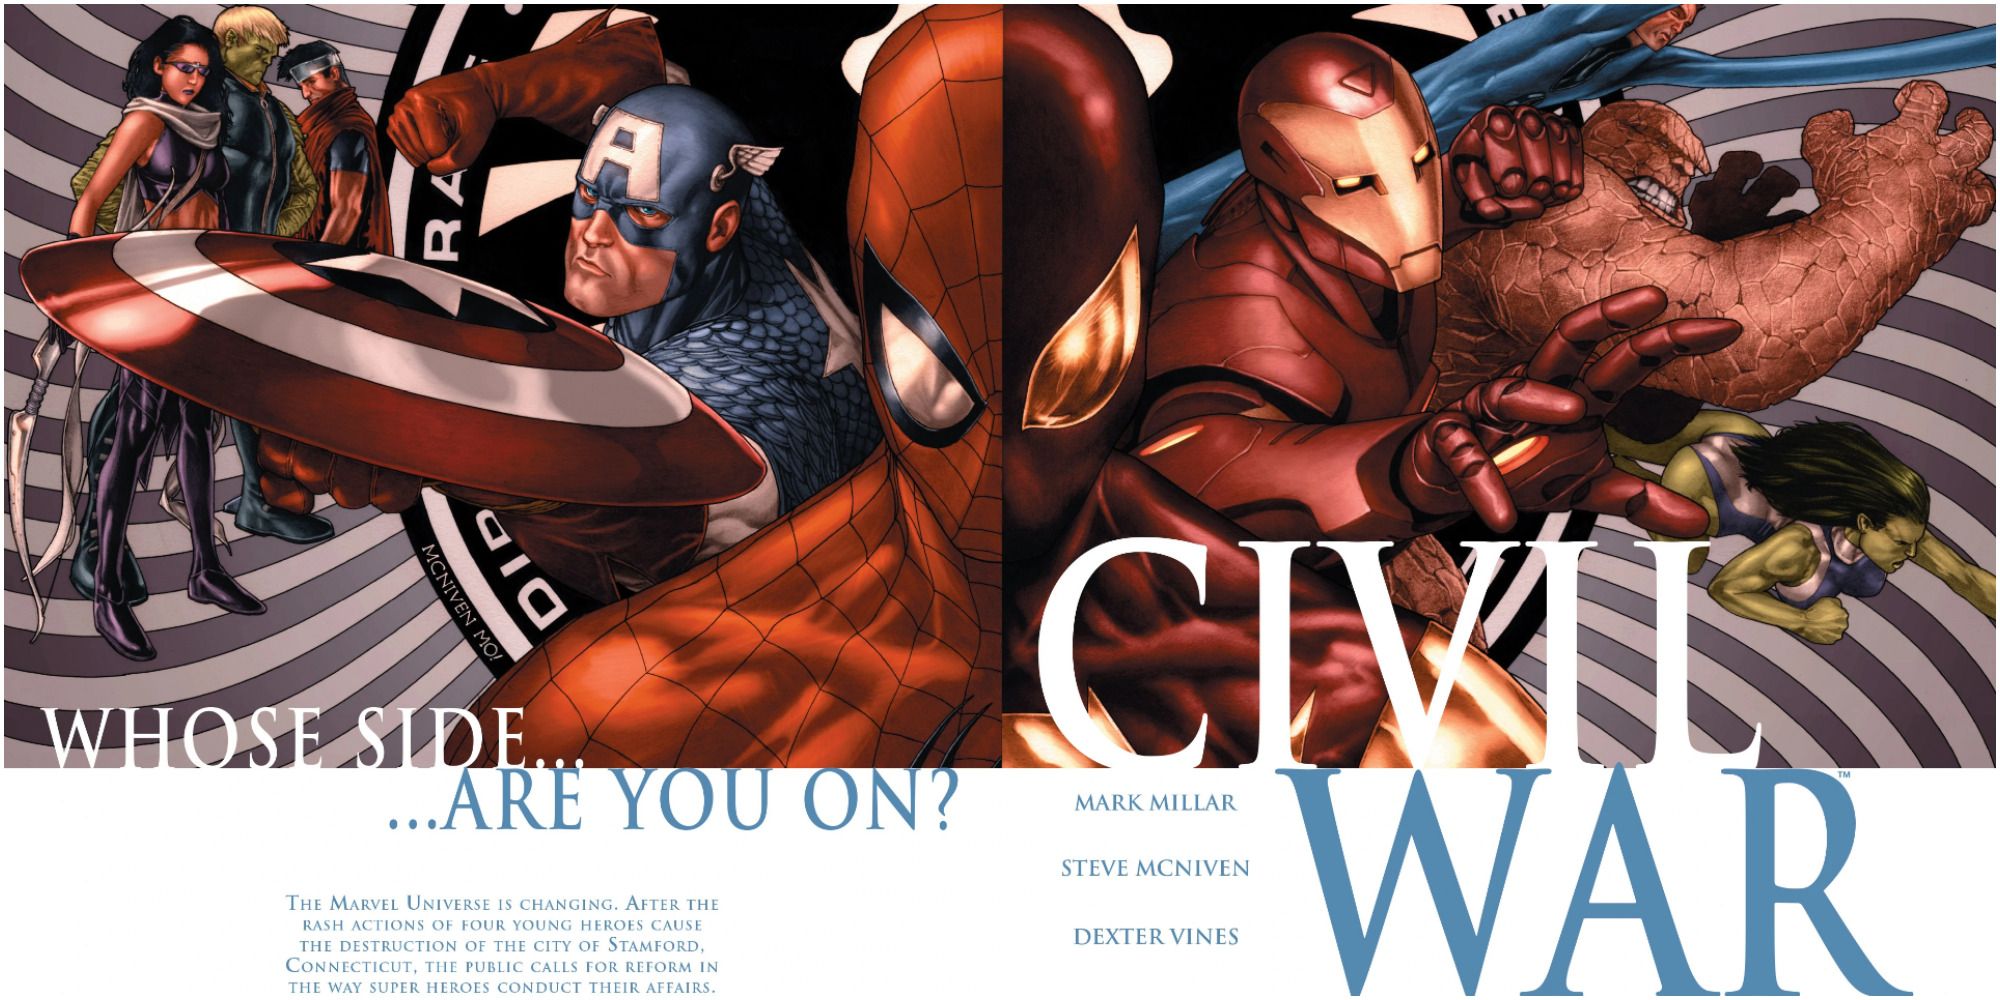 Civil War #2 Spider-Man In The Middle Of Team Captain America And Team Iron Man